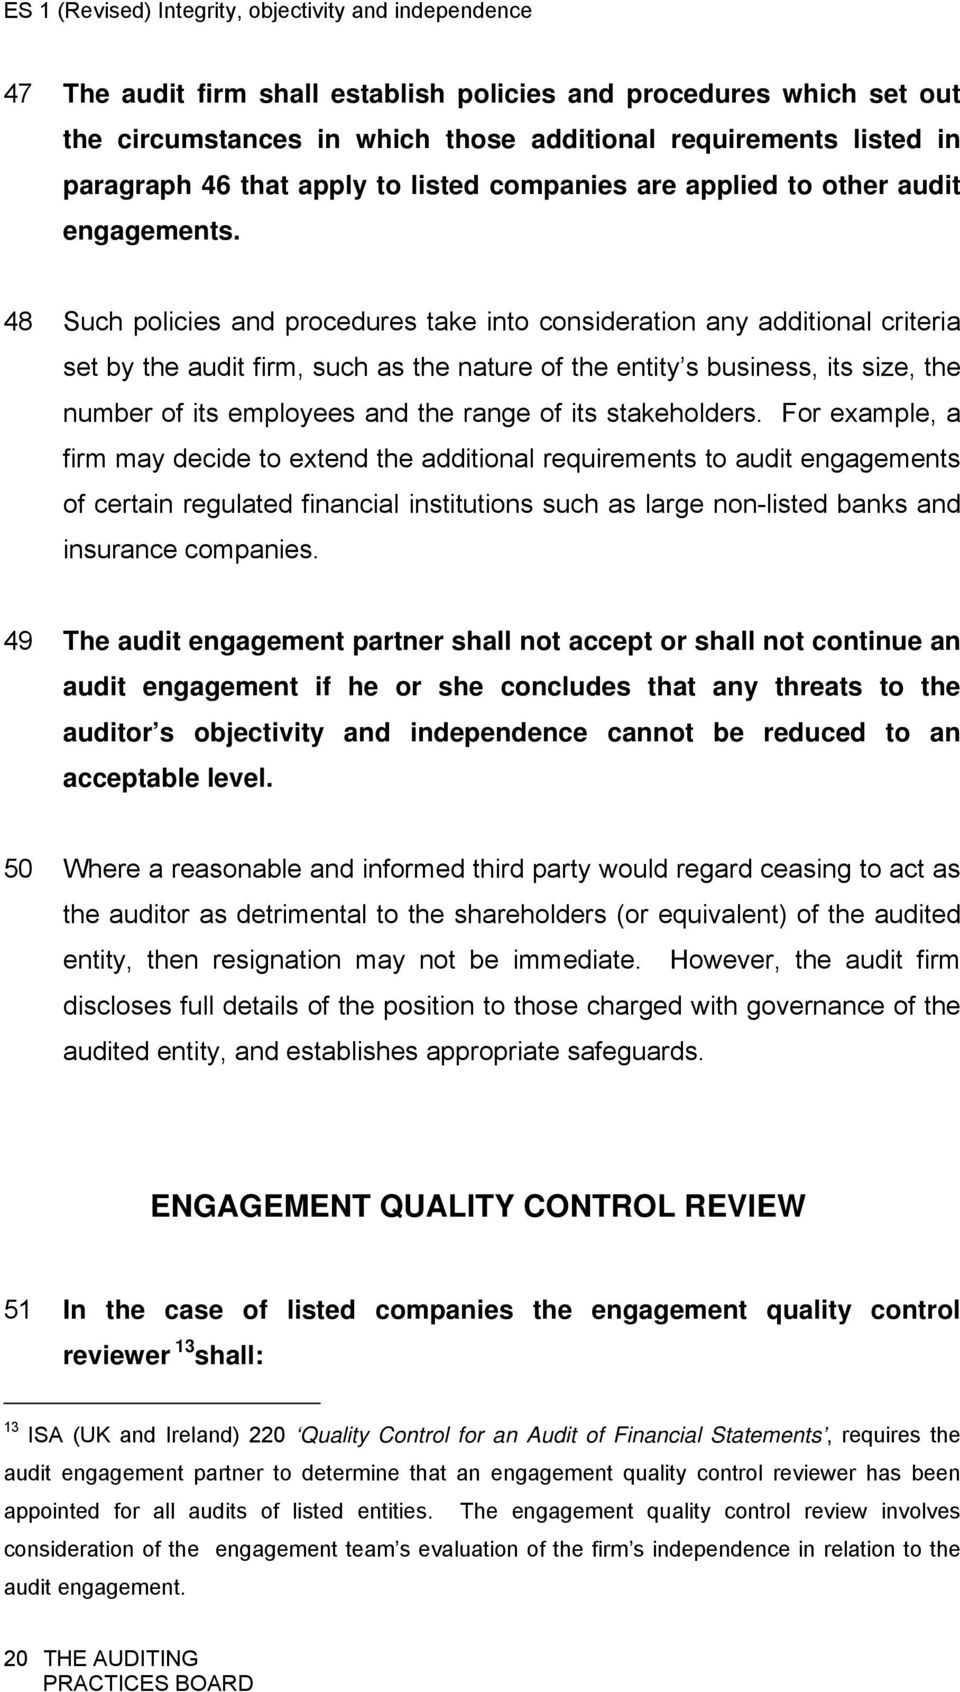 48 Such policies and procedures take into consideration any additional criteria set by the audit firm, such as the nature of the entity s business, its size, the number of its employees and the range